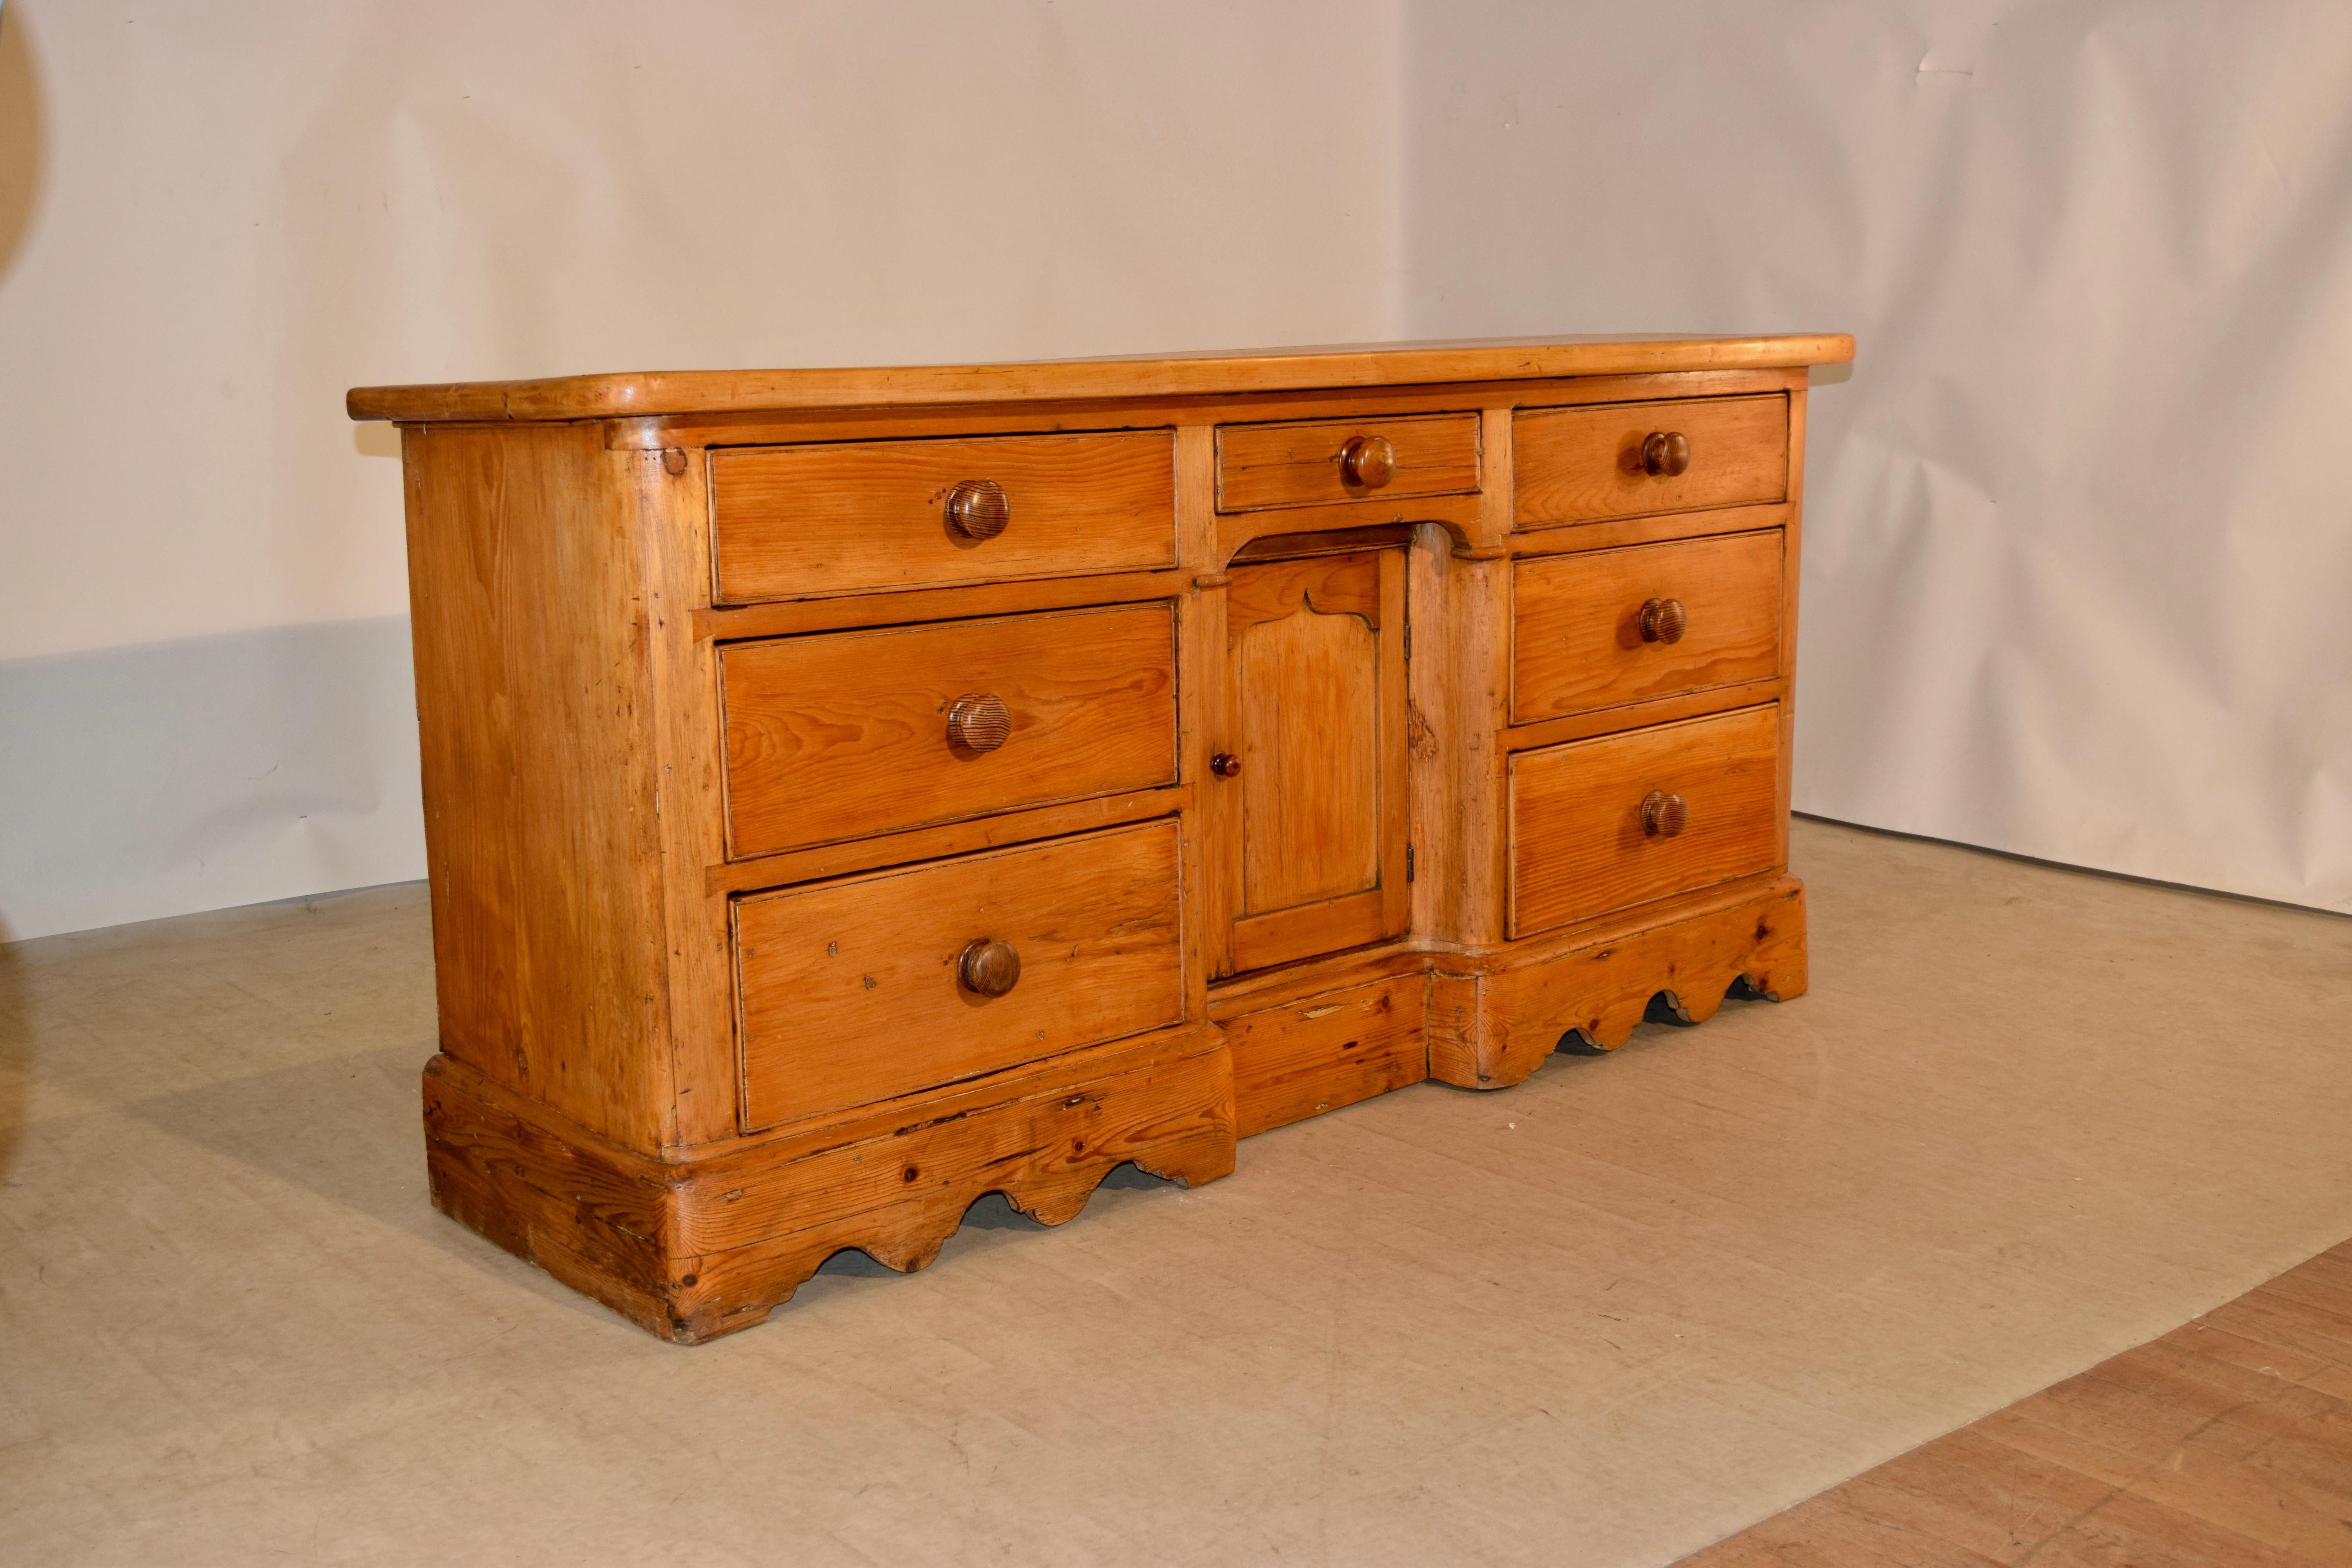 19th century English dresser base with a thick top made from sycamore which measures 1.5 inches in thickness. The base is made of pine and has simple sides and two sets of three drawers each flanking a single drawer over a single door which opens to